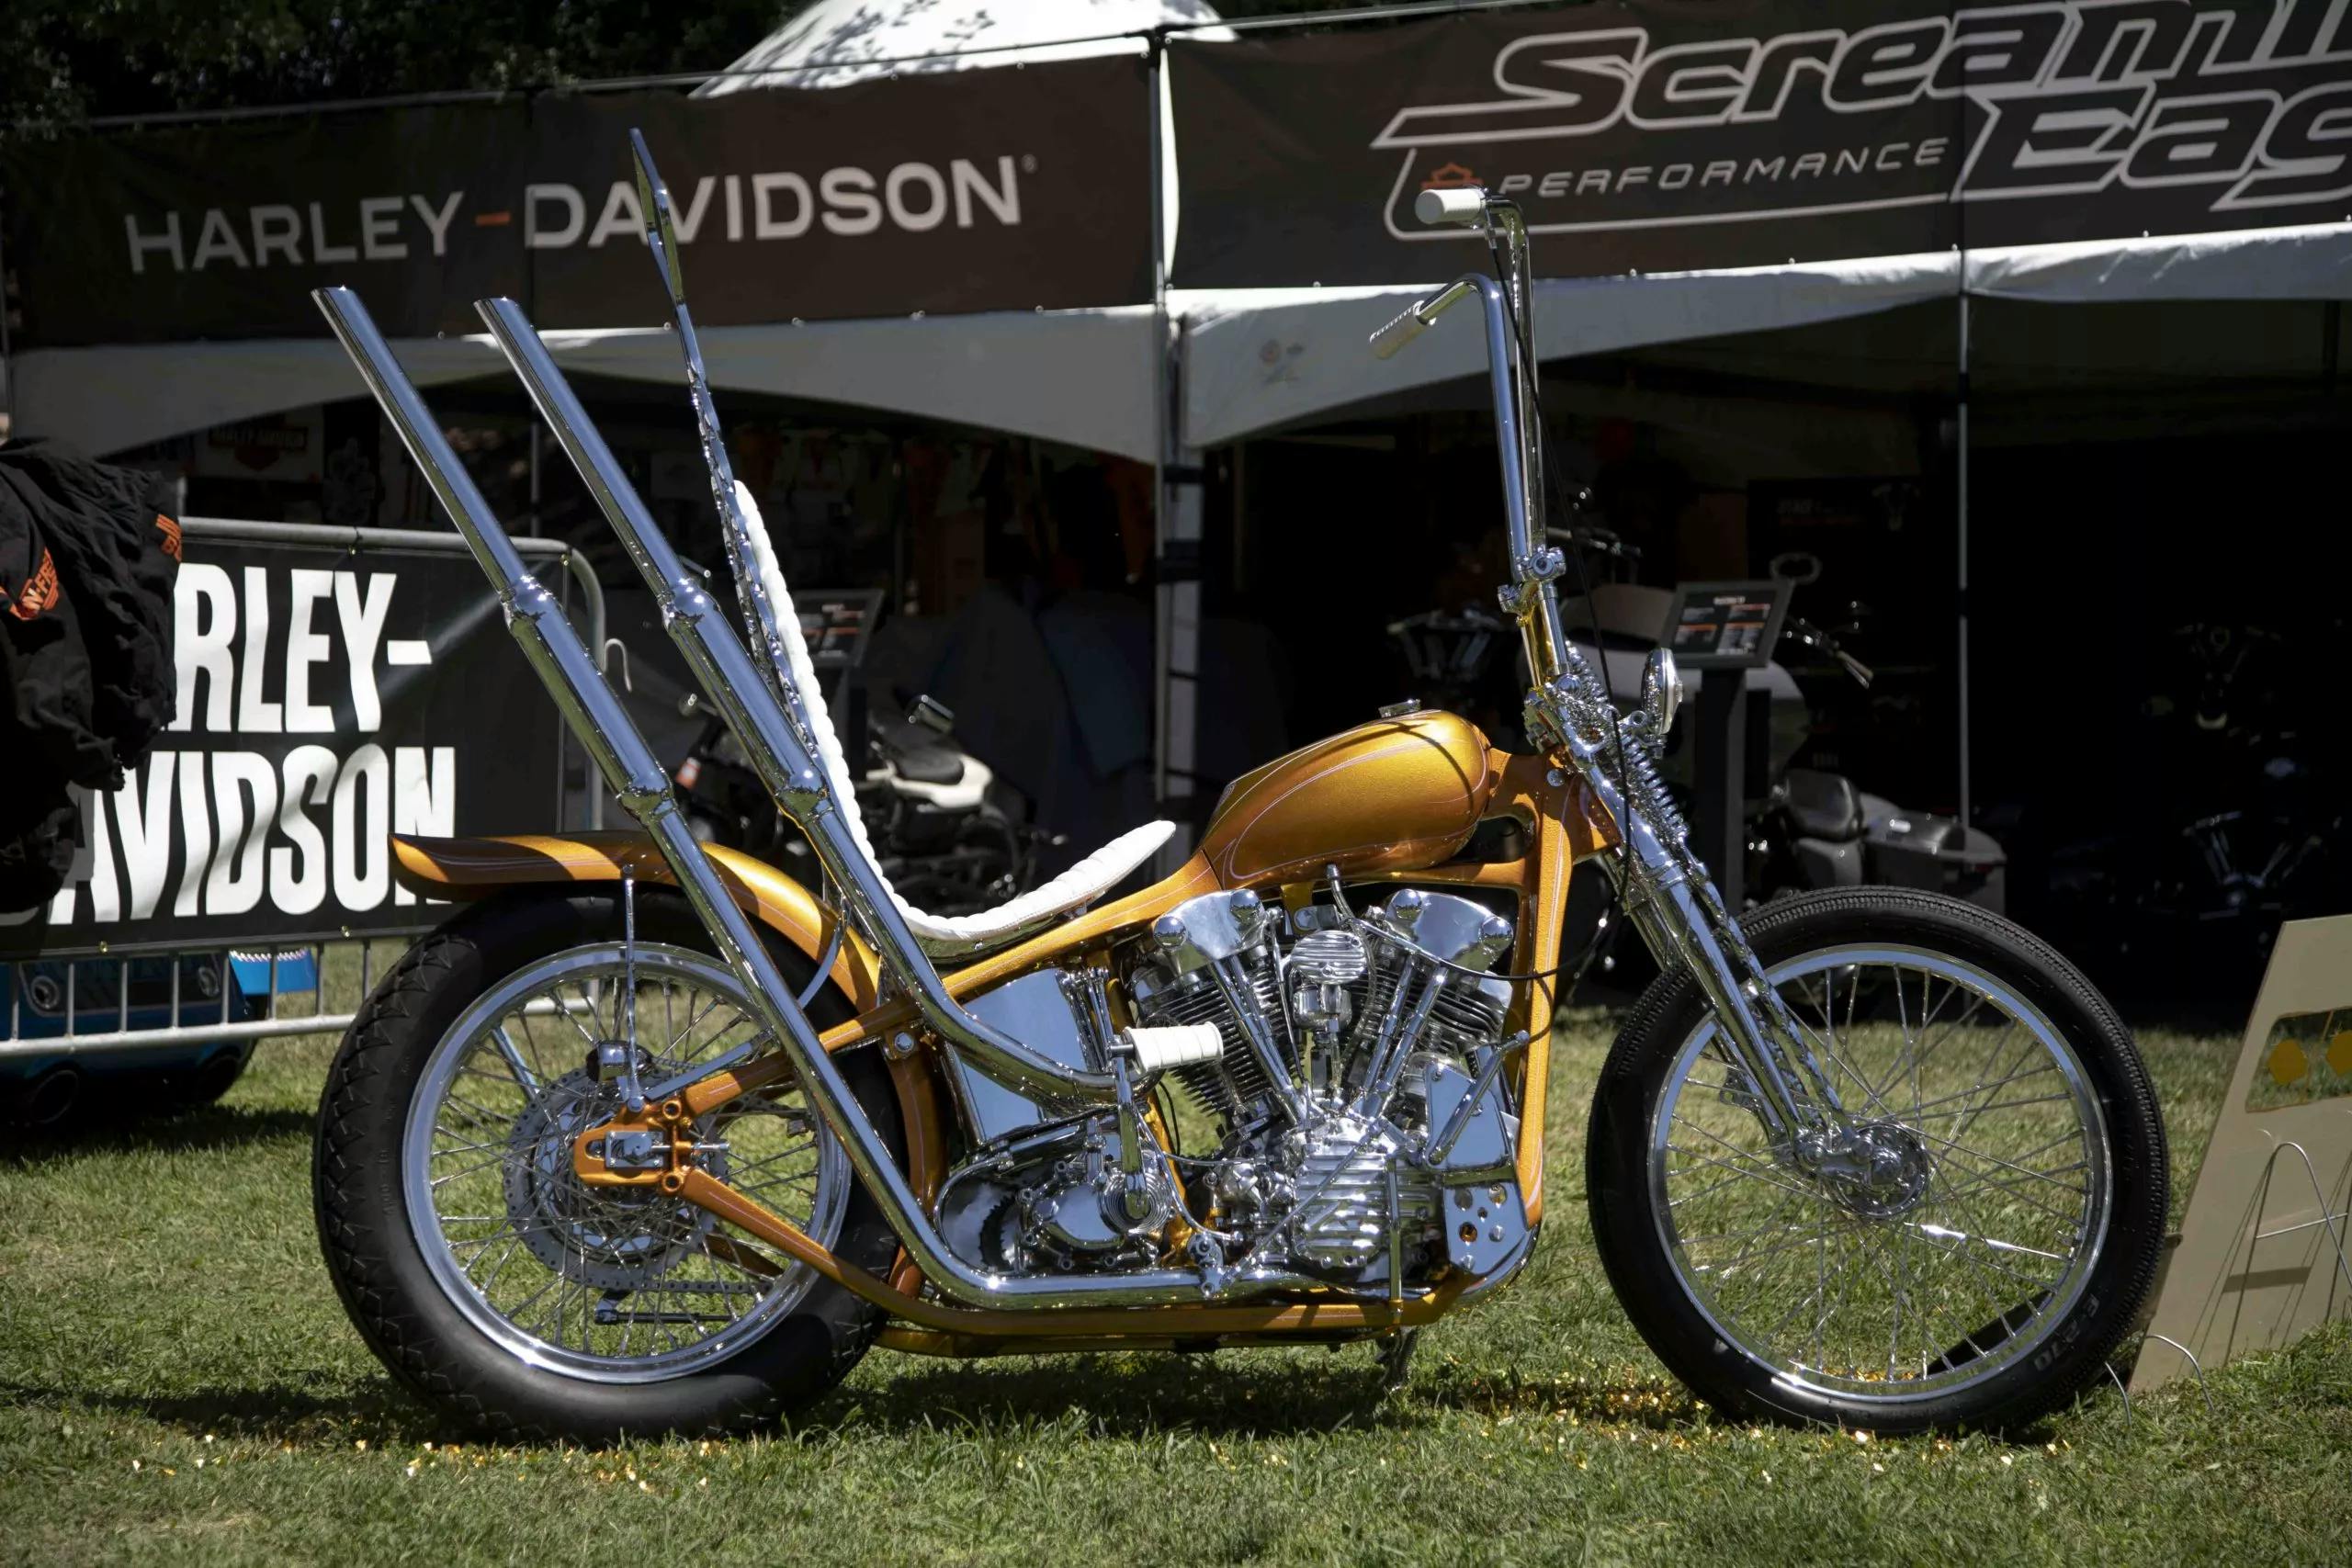 born free show, vintage motorcycles